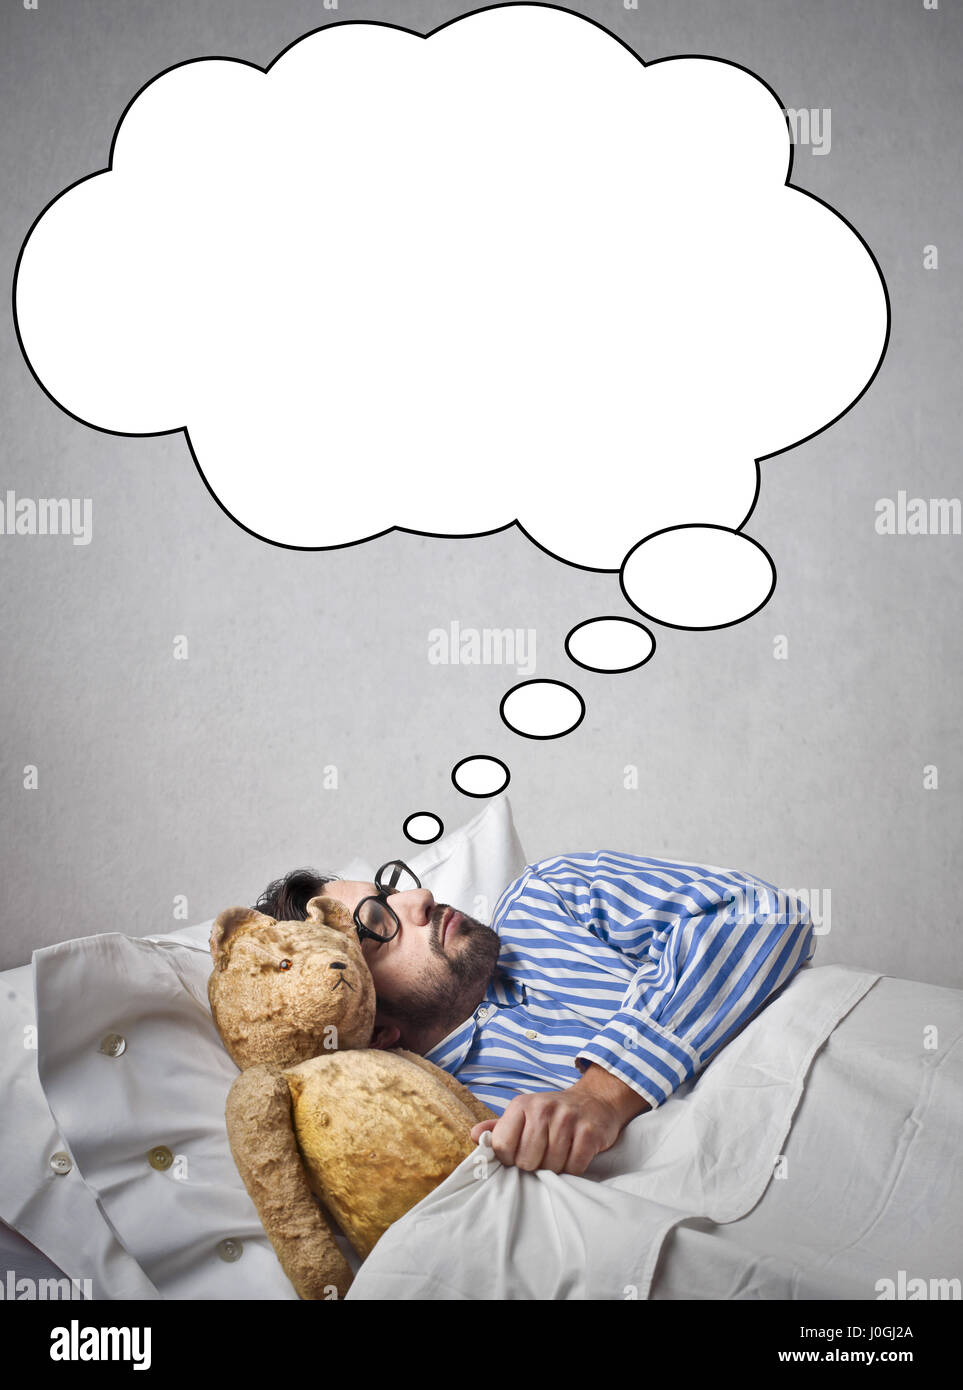 Man in bed dreaming Stock Photo